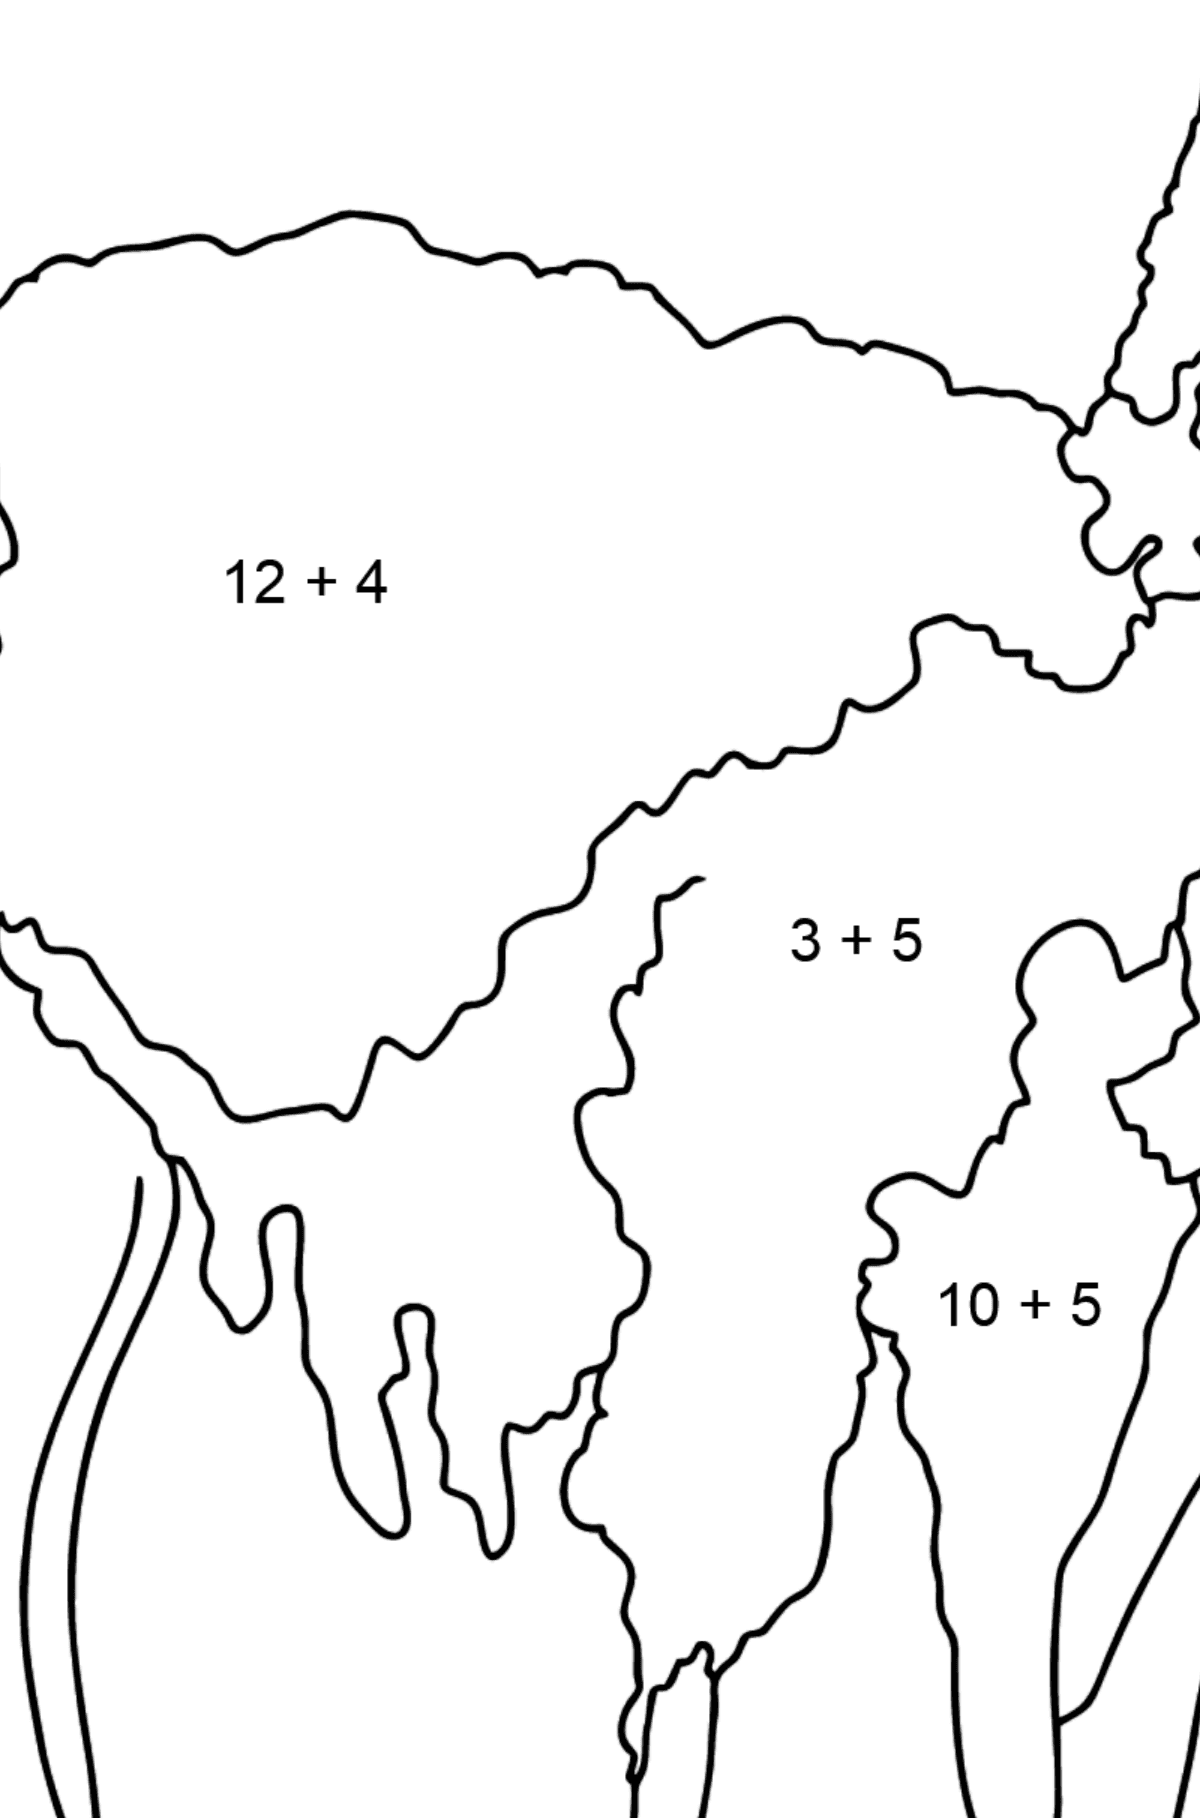 Coloring Page - A Lama is Inspecting the Area - Math Coloring - Addition for Kids